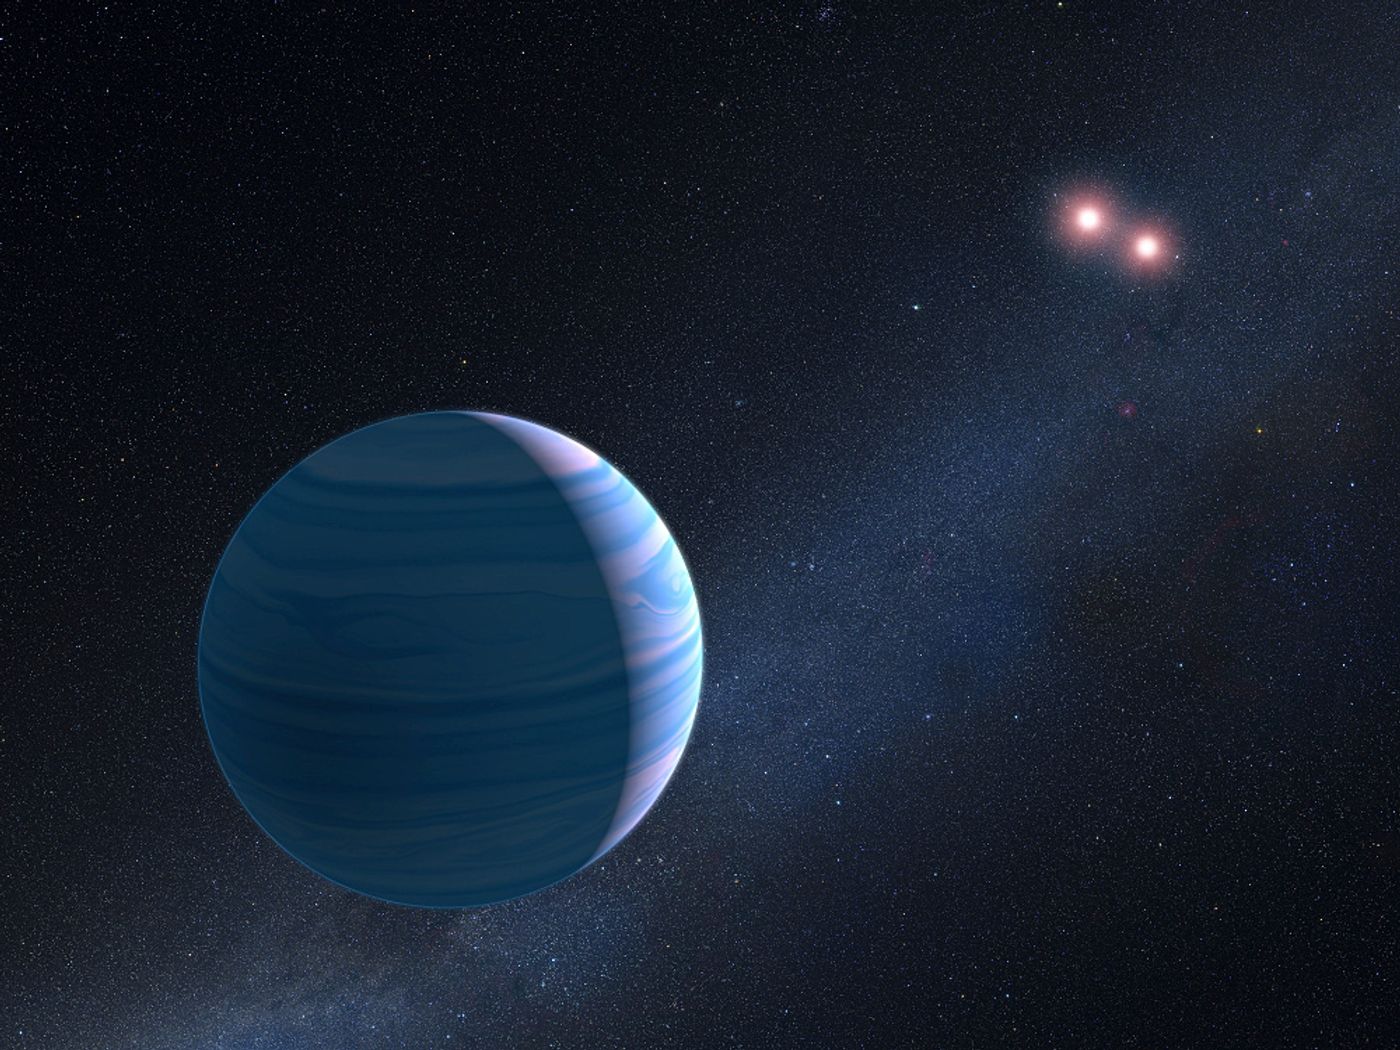 A circumbinary exoplanet has, for the first time, exhibited microlensing effects on the light around it.